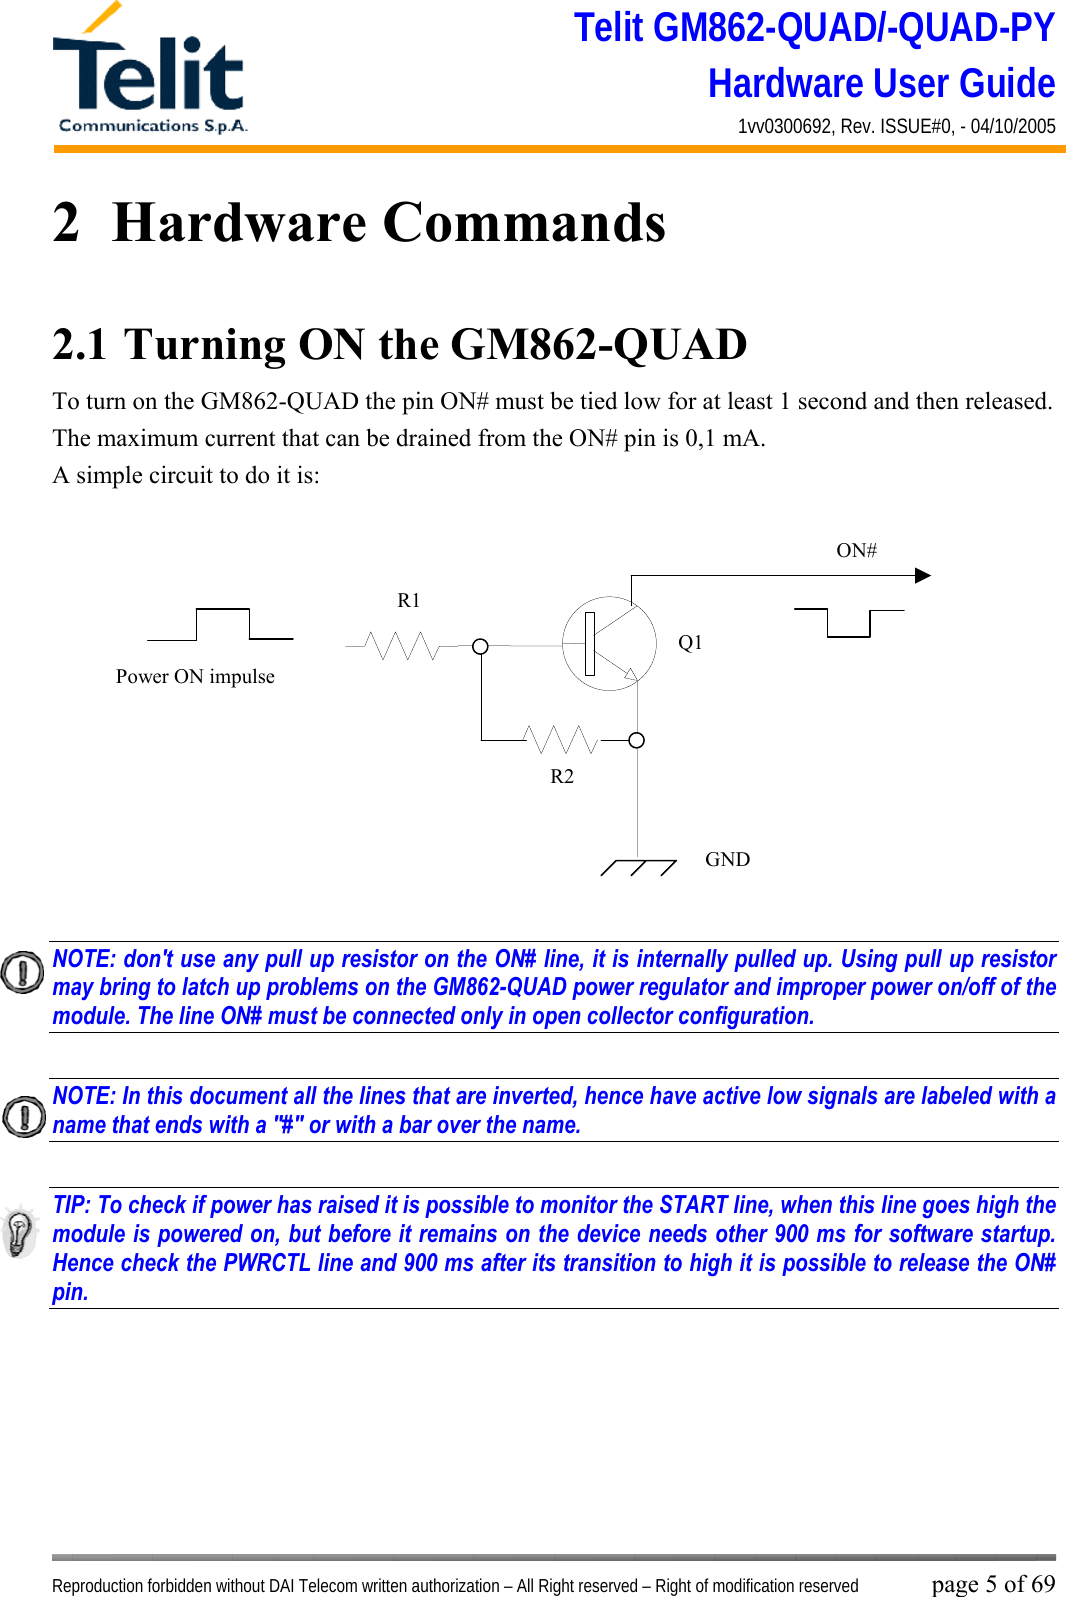 Telit GM862-QUAD/-QUAD-PY Hardware User Guide 1vv0300692, Rev. ISSUE#0, - 04/10/2005   Reproduction forbidden without DAI Telecom written authorization – All Right reserved – Right of modification reserved page 5 of 69 2  Hardware Commands 2.1  Turning ON the GM862-QUAD To turn on the GM862-QUAD the pin ON# must be tied low for at least 1 second and then released. The maximum current that can be drained from the ON# pin is 0,1 mA. A simple circuit to do it is:   NOTE: don&apos;t use any pull up resistor on the ON# line, it is internally pulled up. Using pull up resistor may bring to latch up problems on the GM862-QUAD power regulator and improper power on/off of the module. The line ON# must be connected only in open collector configuration.  NOTE: In this document all the lines that are inverted, hence have active low signals are labeled with a name that ends with a &quot;#&quot; or with a bar over the name.  TIP: To check if power has raised it is possible to monitor the START line, when this line goes high the module is powered on, but before it remains on the device needs other 900 ms for software startup. Hence check the PWRCTL line and 900 ms after its transition to high it is possible to release the ON# pin.     ON#Power ON impulse  GNDR1R2Q1